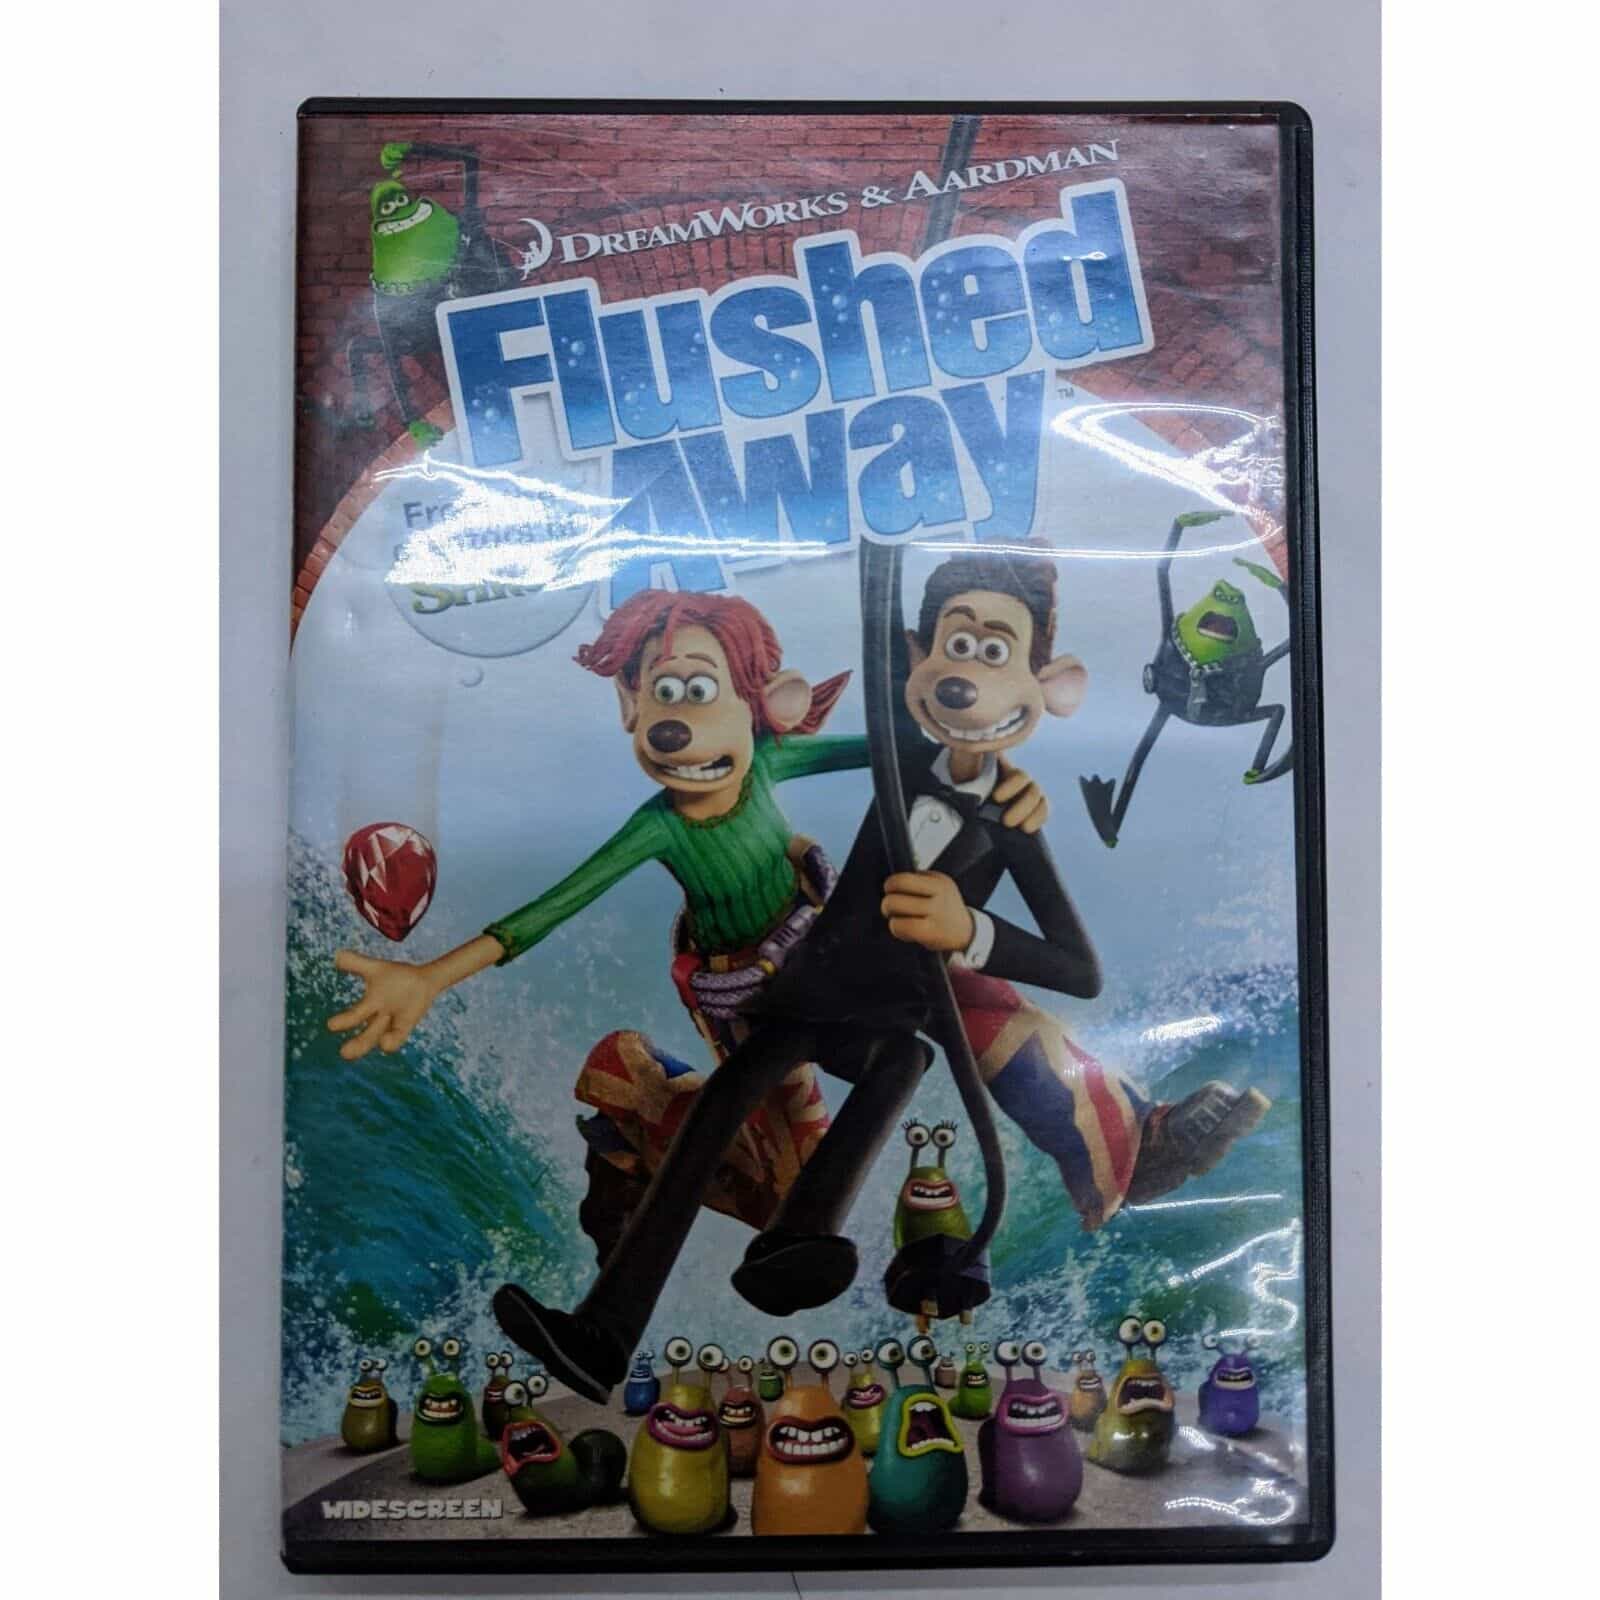 Flushed Away DVD Movie – Widescreen edition